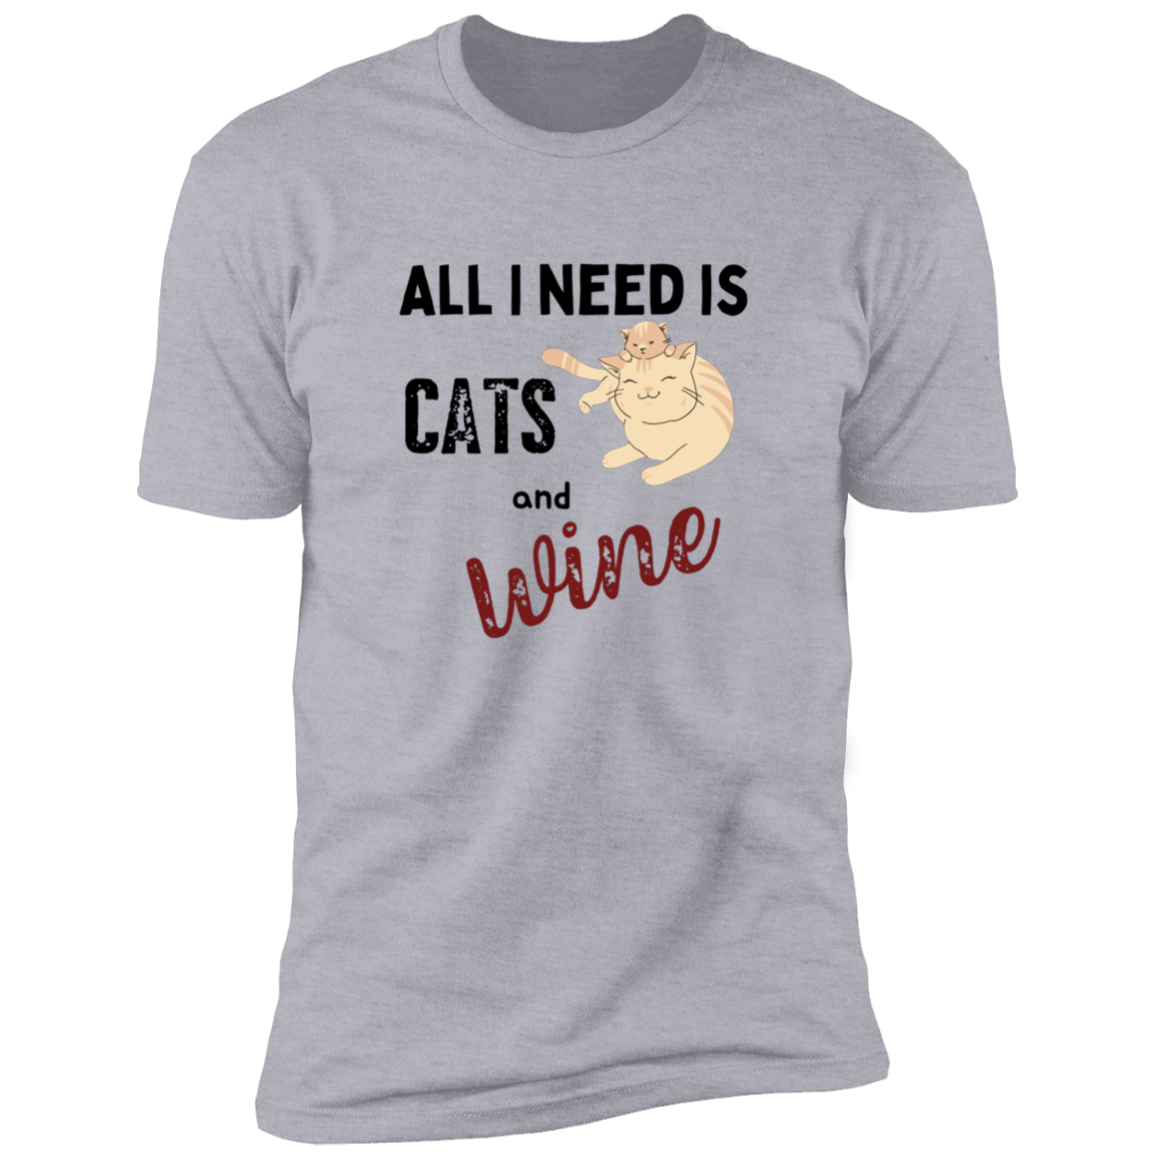 All I Need is Cats and Wine, Cat shirt for humas, in light heather gray